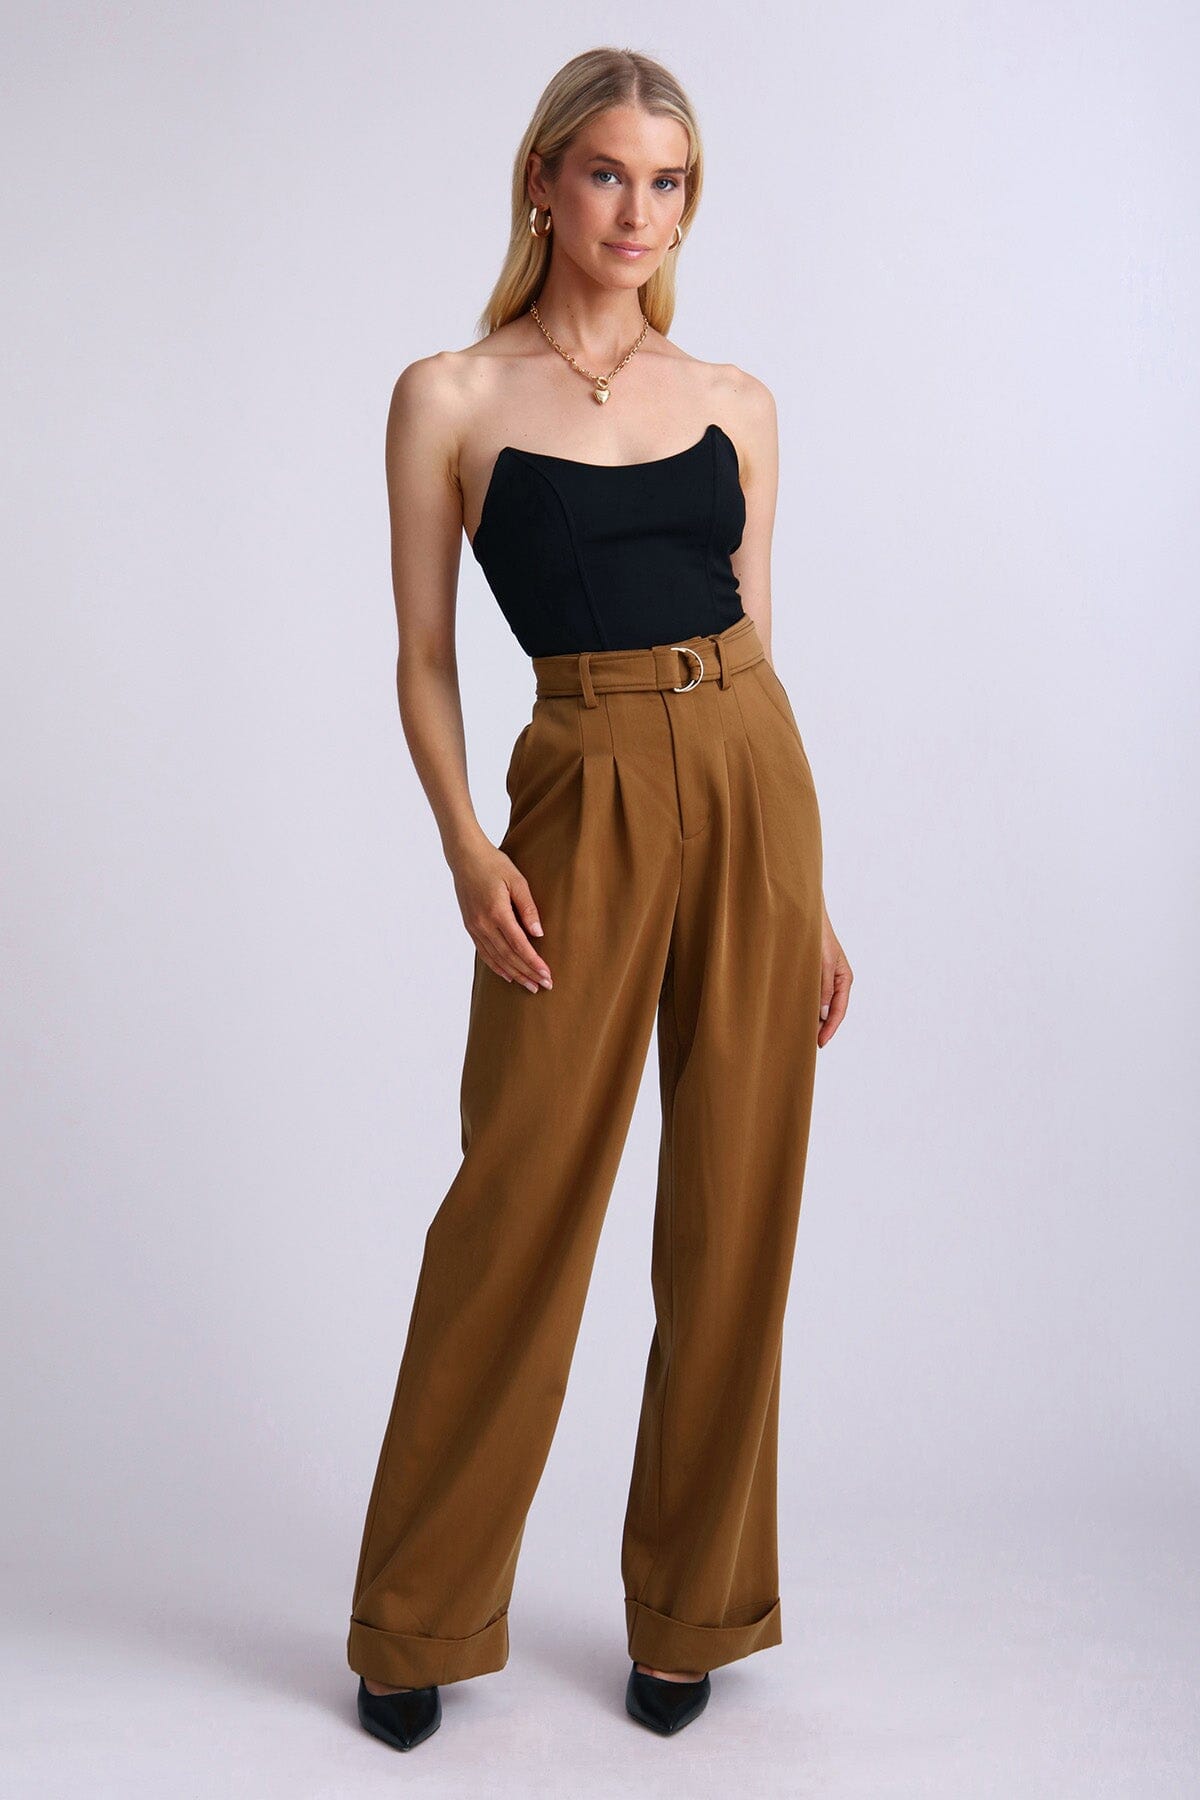 Going Out Pants for Women Button Waist Fashion Summer Trendy Trousers with  Multi Pockets Loose Wide Leg Pants Fashion at Amazon Women's Clothing store